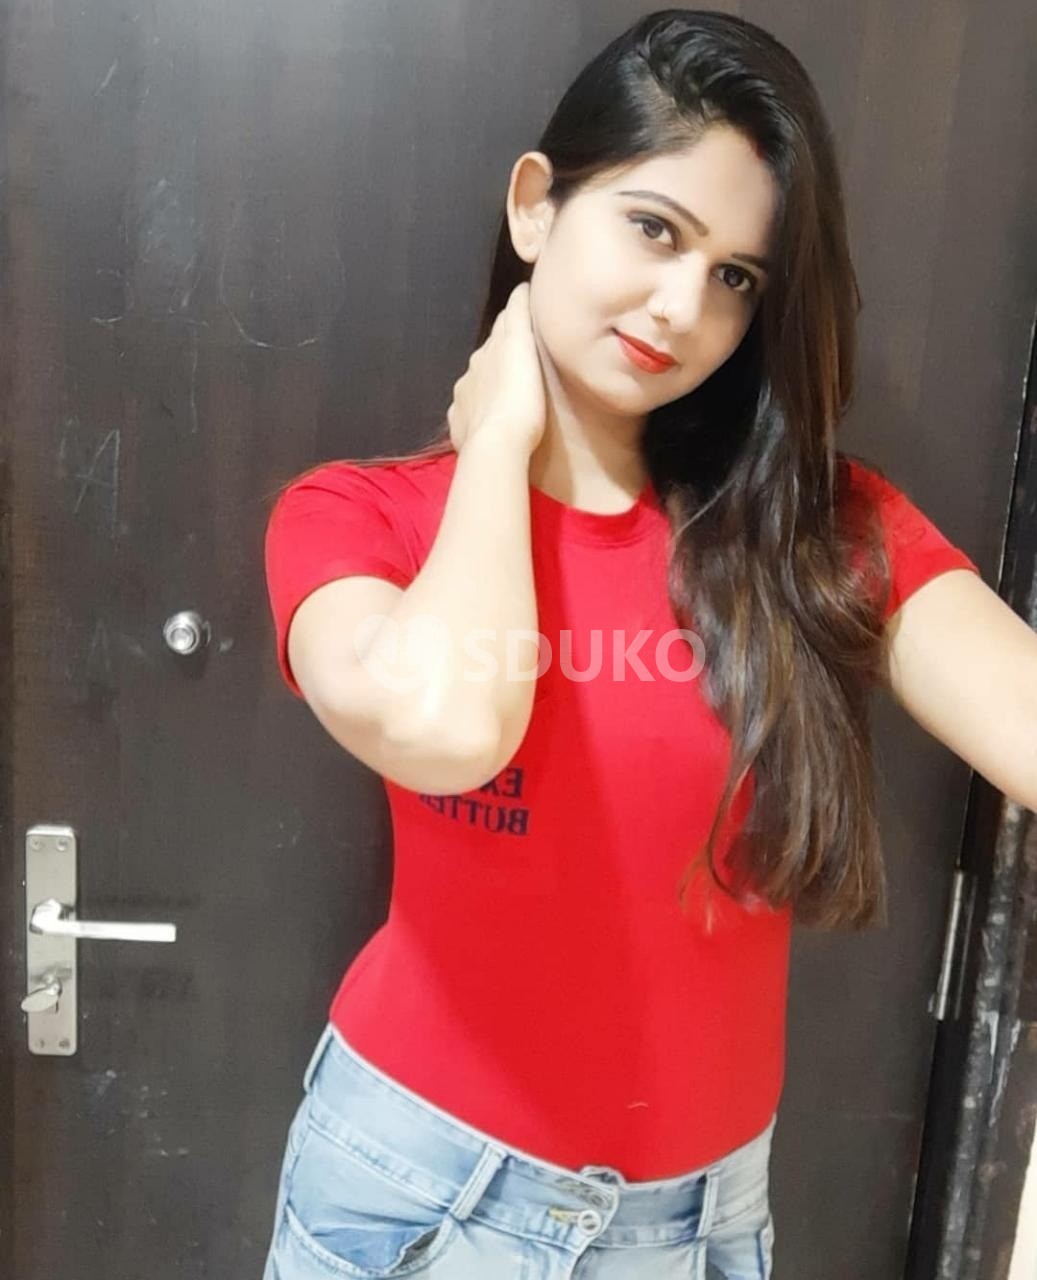 Koramangala ☎️ VIP LOW PRICE (Kavya) ESCORT FULL HARD FUCK WITH NAUGHTY IF YOU WANT TO FUCK MY PUSSY WITH BIG BOOBS 